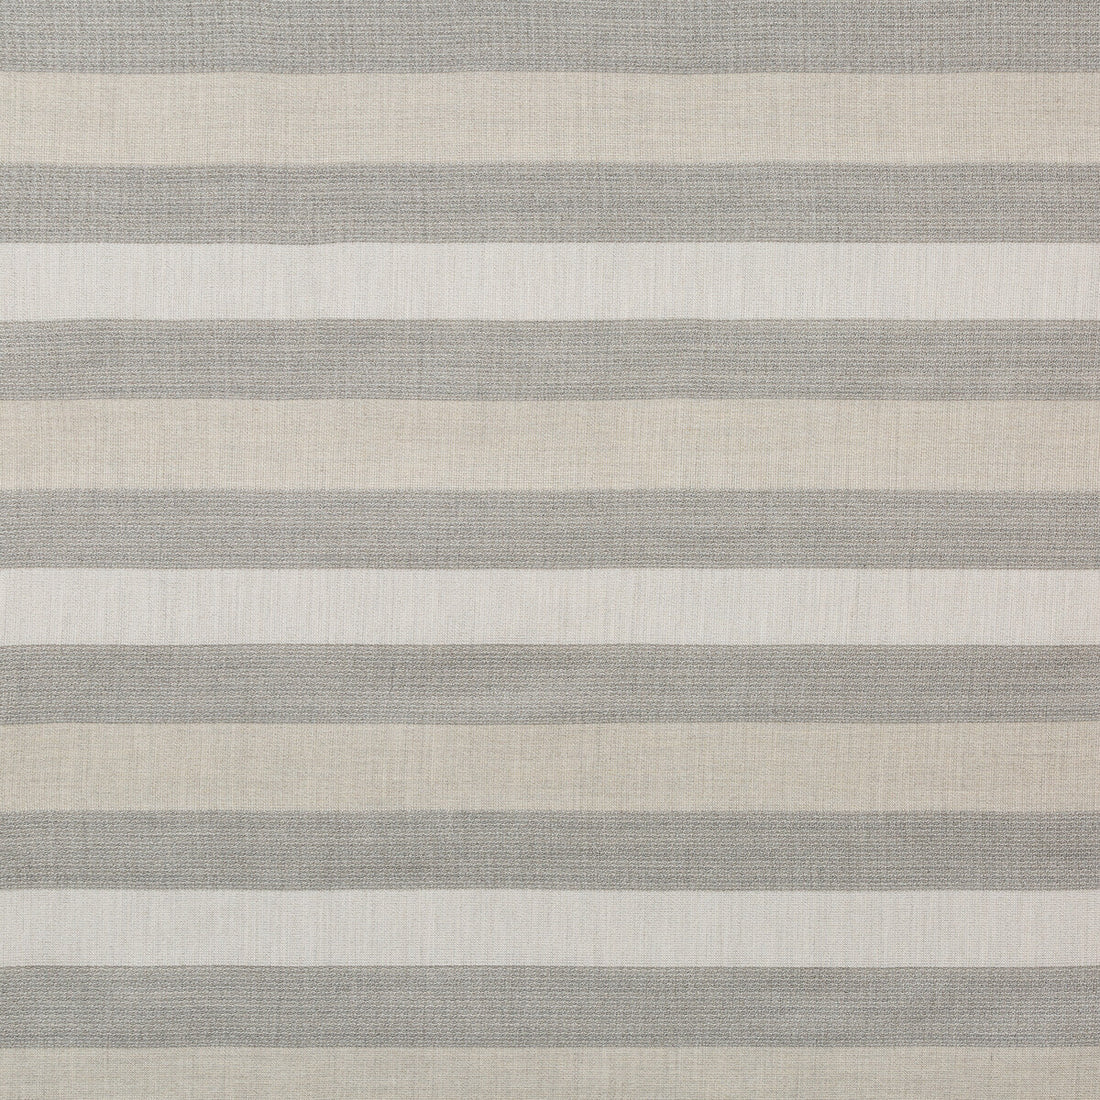 Pure And Simple fabric in sandstone color - pattern 35496.11.0 - by Kravet Couture in the Vista collection